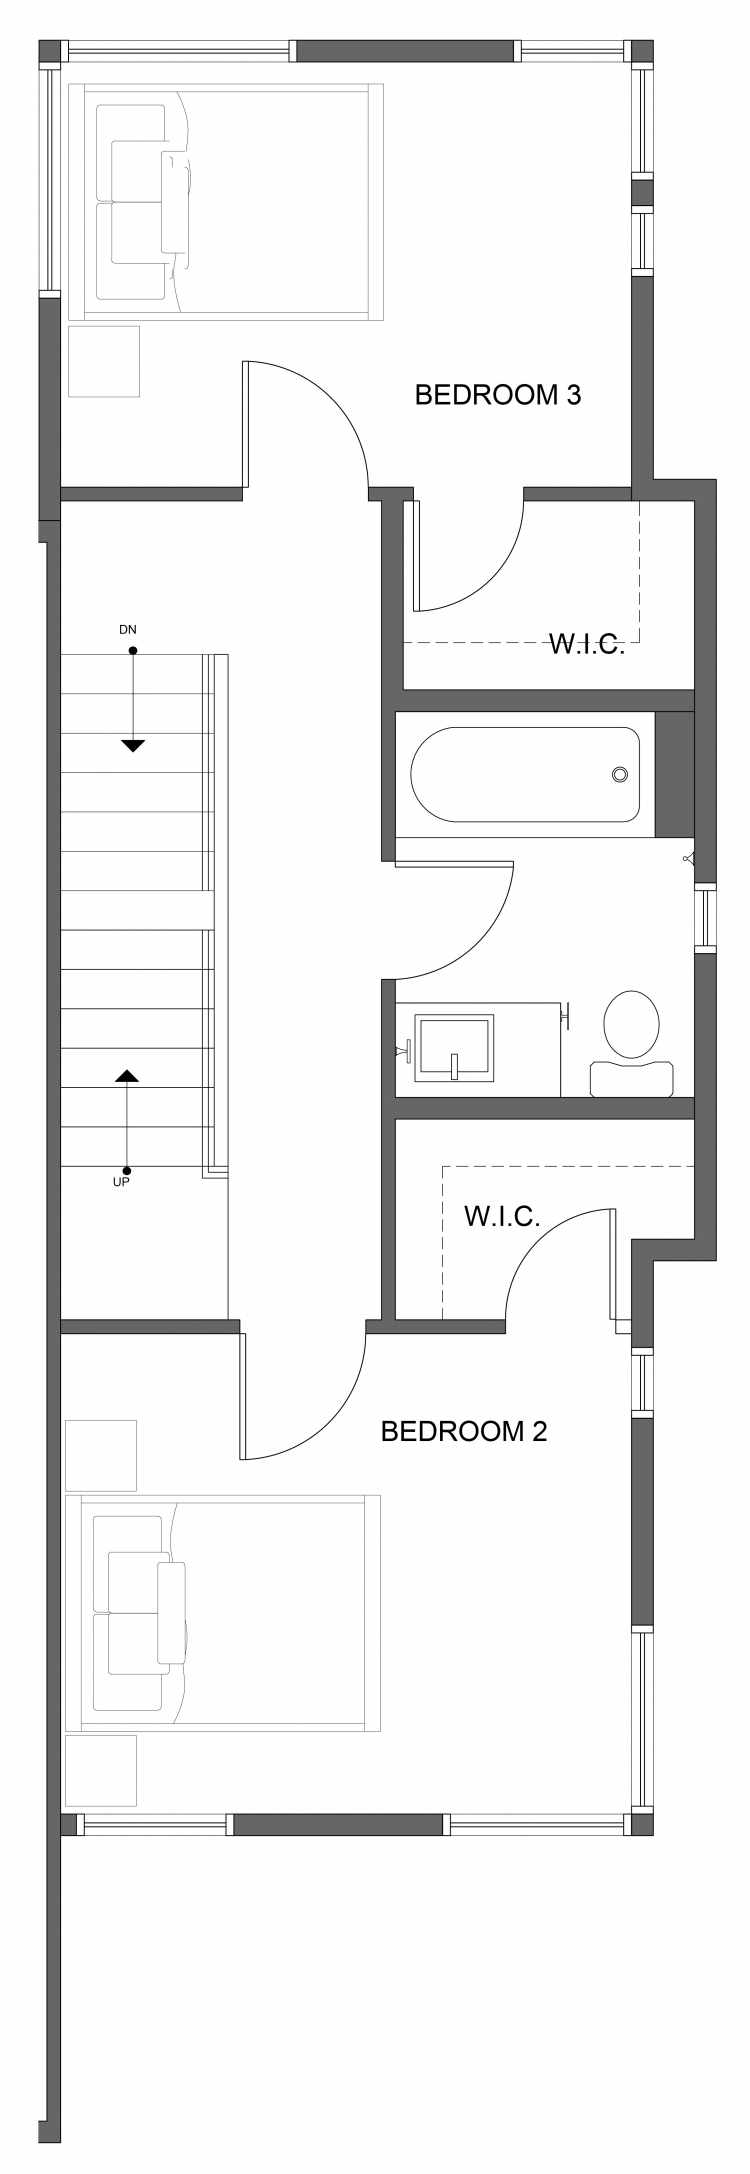 Second Floor Plan of 1030C NE 70th St, One of the Sopris on 70th Townhomes in Roosevelt